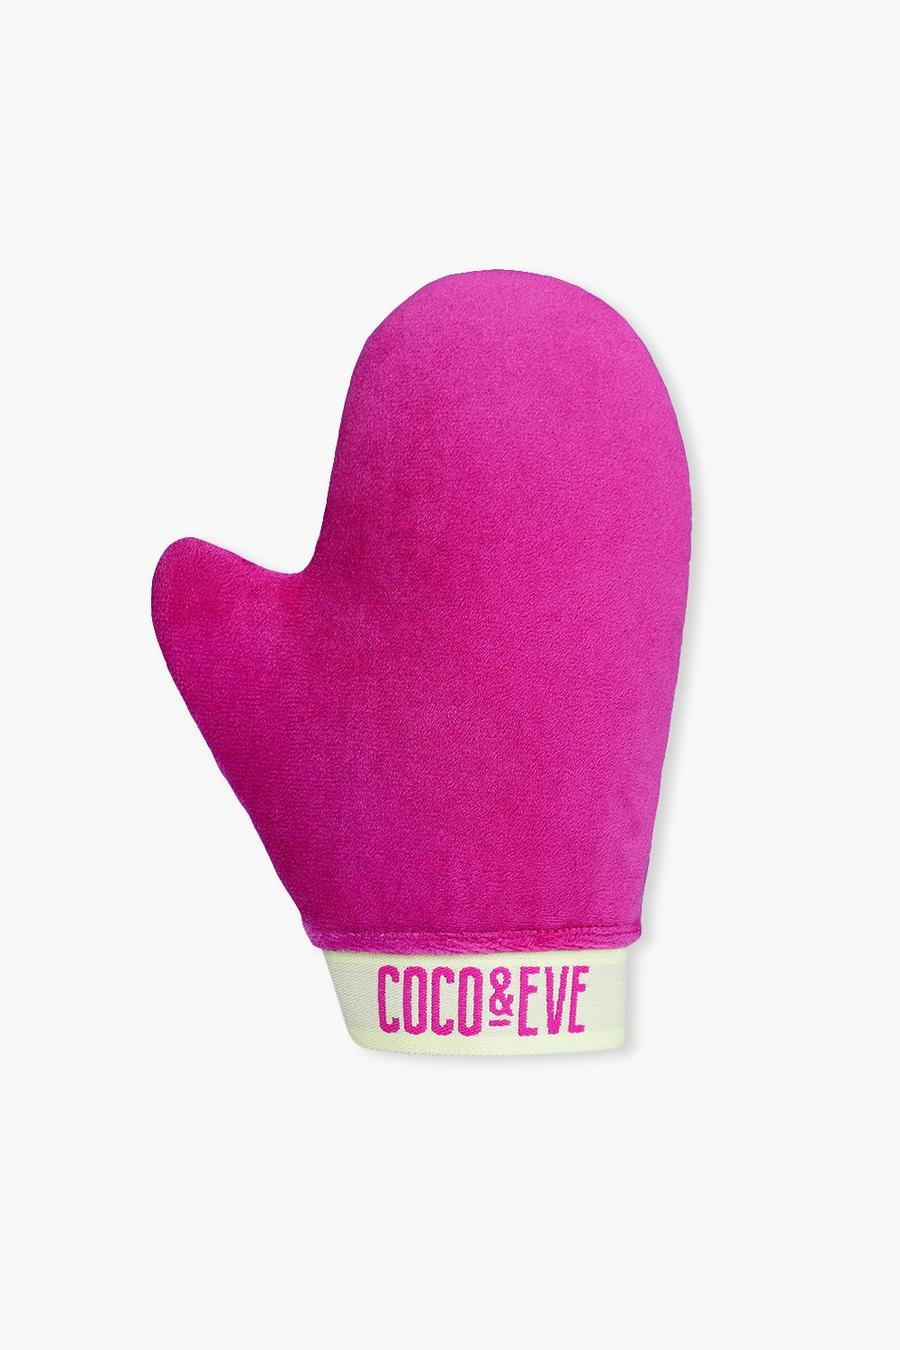 Coco & Eve - Guanto abbronzante Sunny Honey effetto velluto, Pink image number 1